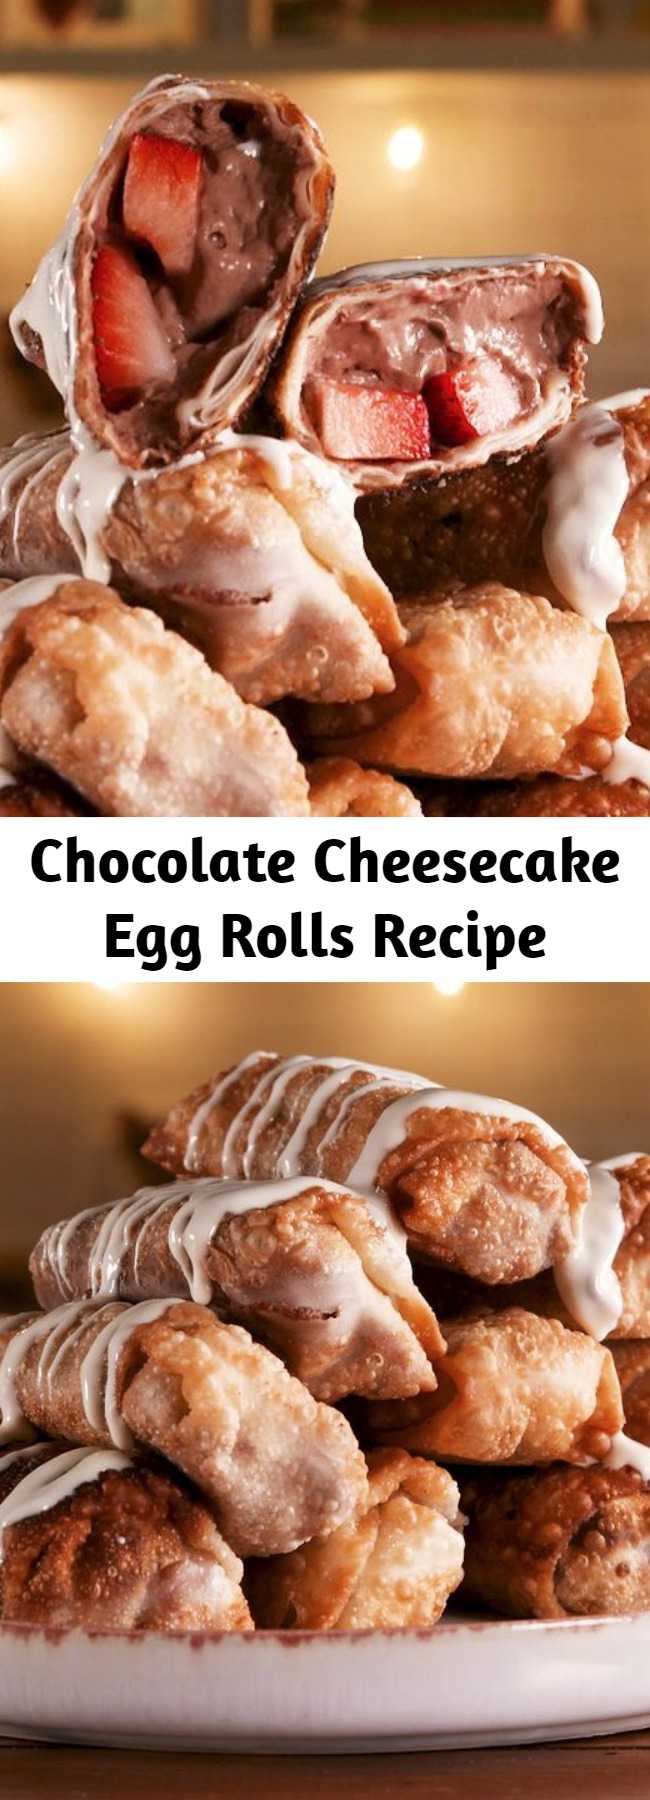 Chocolate Cheesecake Egg Rolls Recipe - Craving chocolate cheesecake but don't have 8 hours to make one? Look no further. This Chocolate Cheesecake Egg Rolls are an absolute dessert WIN.